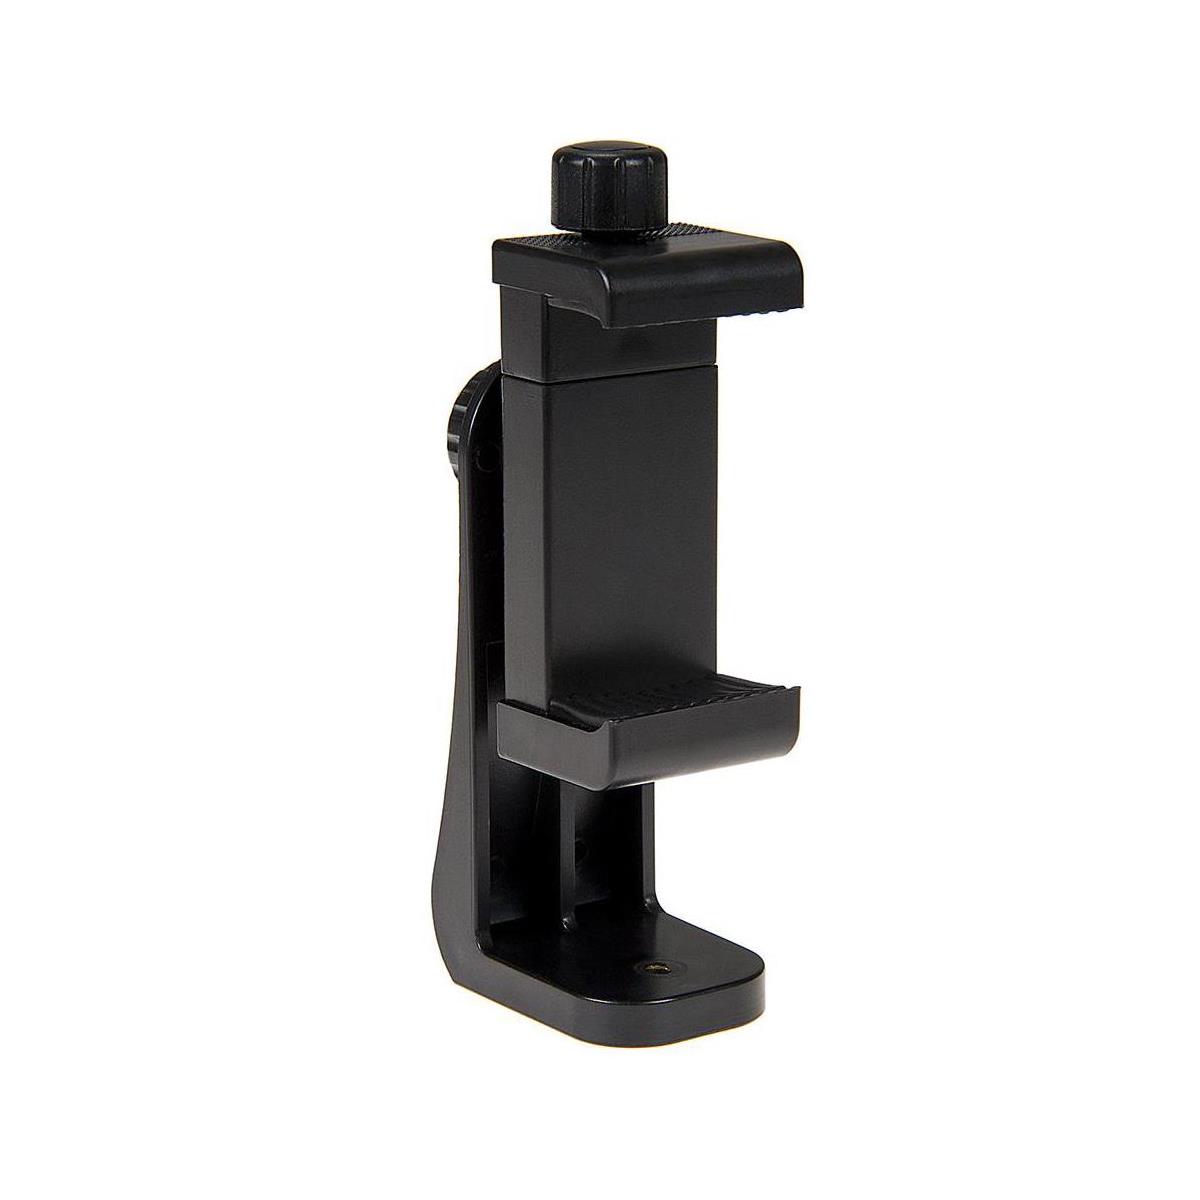 Image of Fotodiox Cell Phone Tripod Mount Adapter for Smartphones